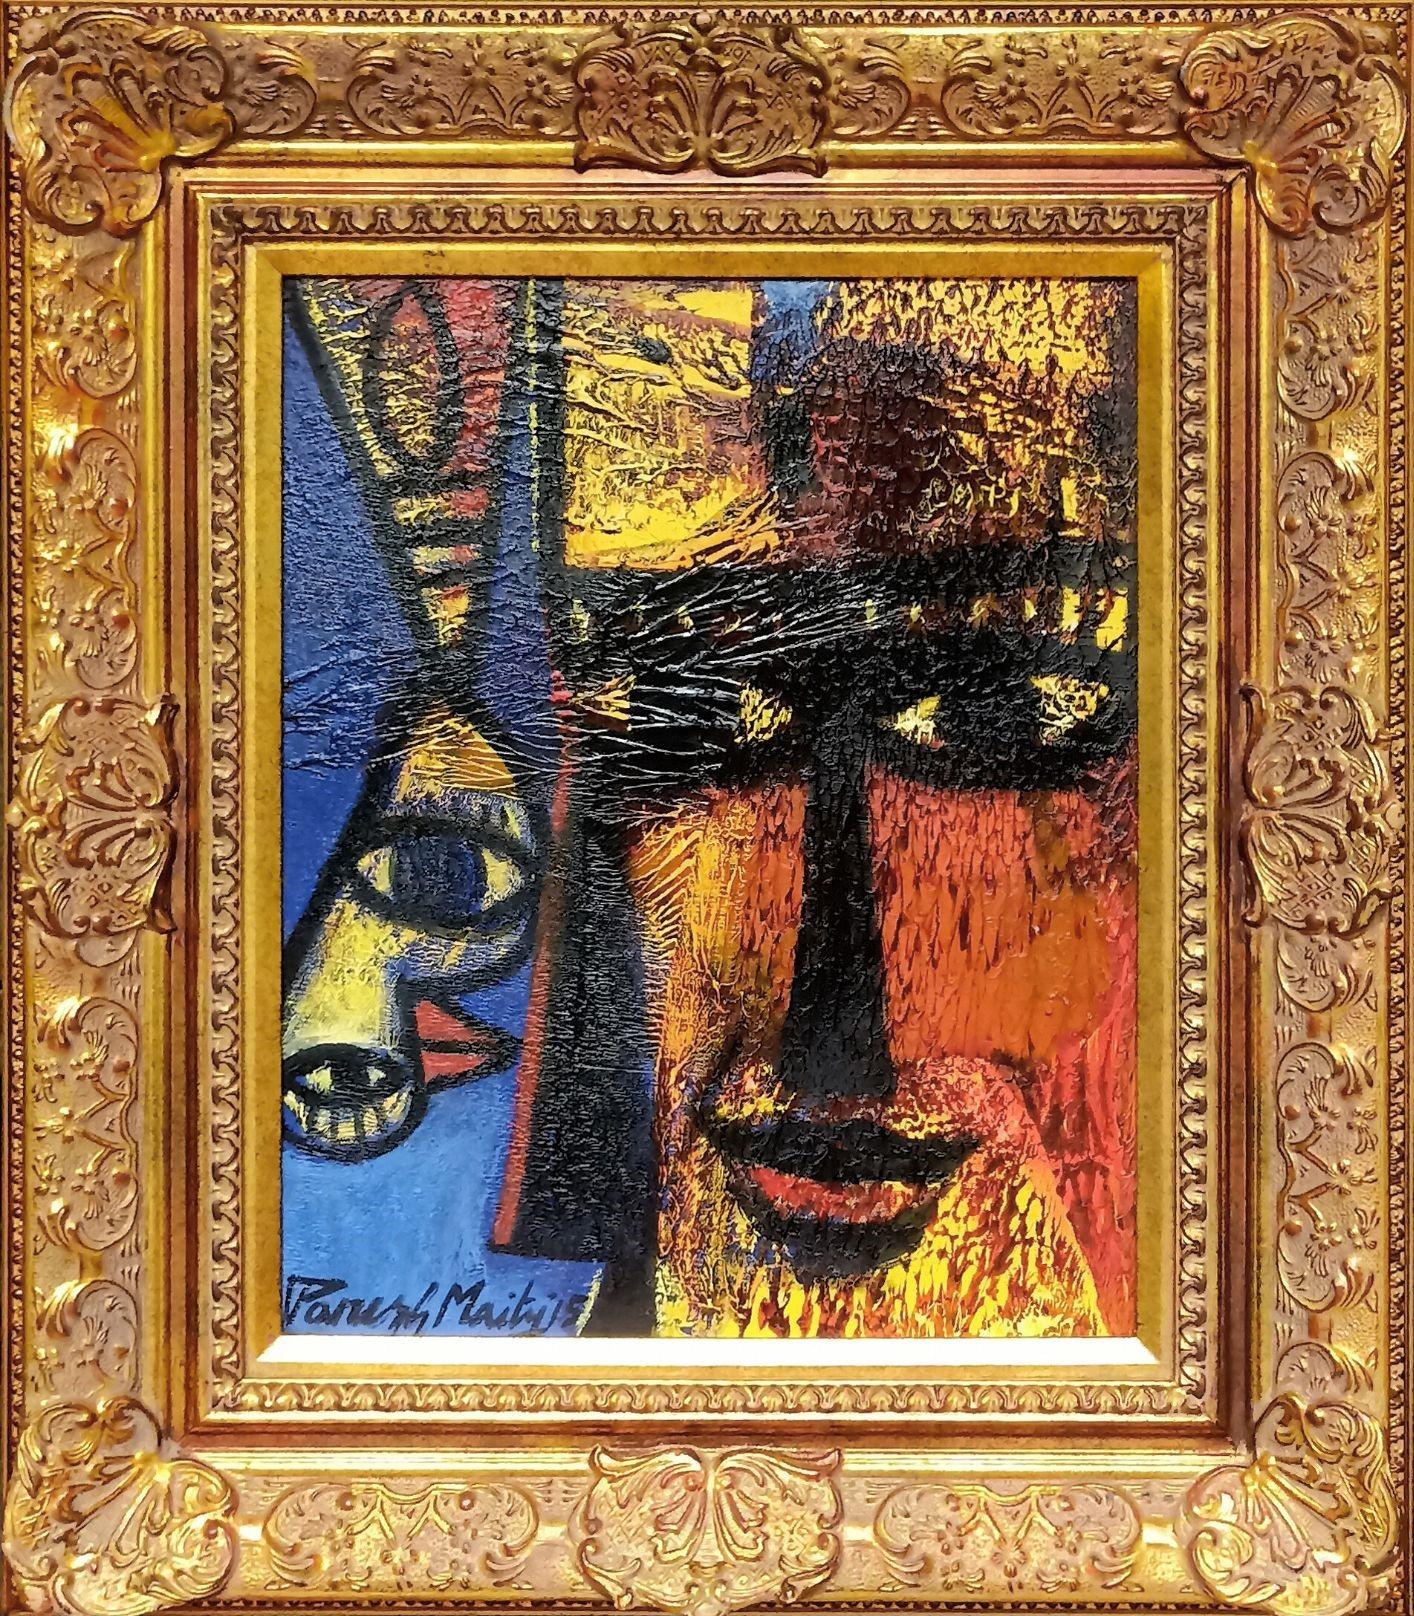 Paresh Maity Figurative Painting - Expression-l, Oi on Canvas, Black, Yellow, Red, Blue by Indian Artist"In Stock"